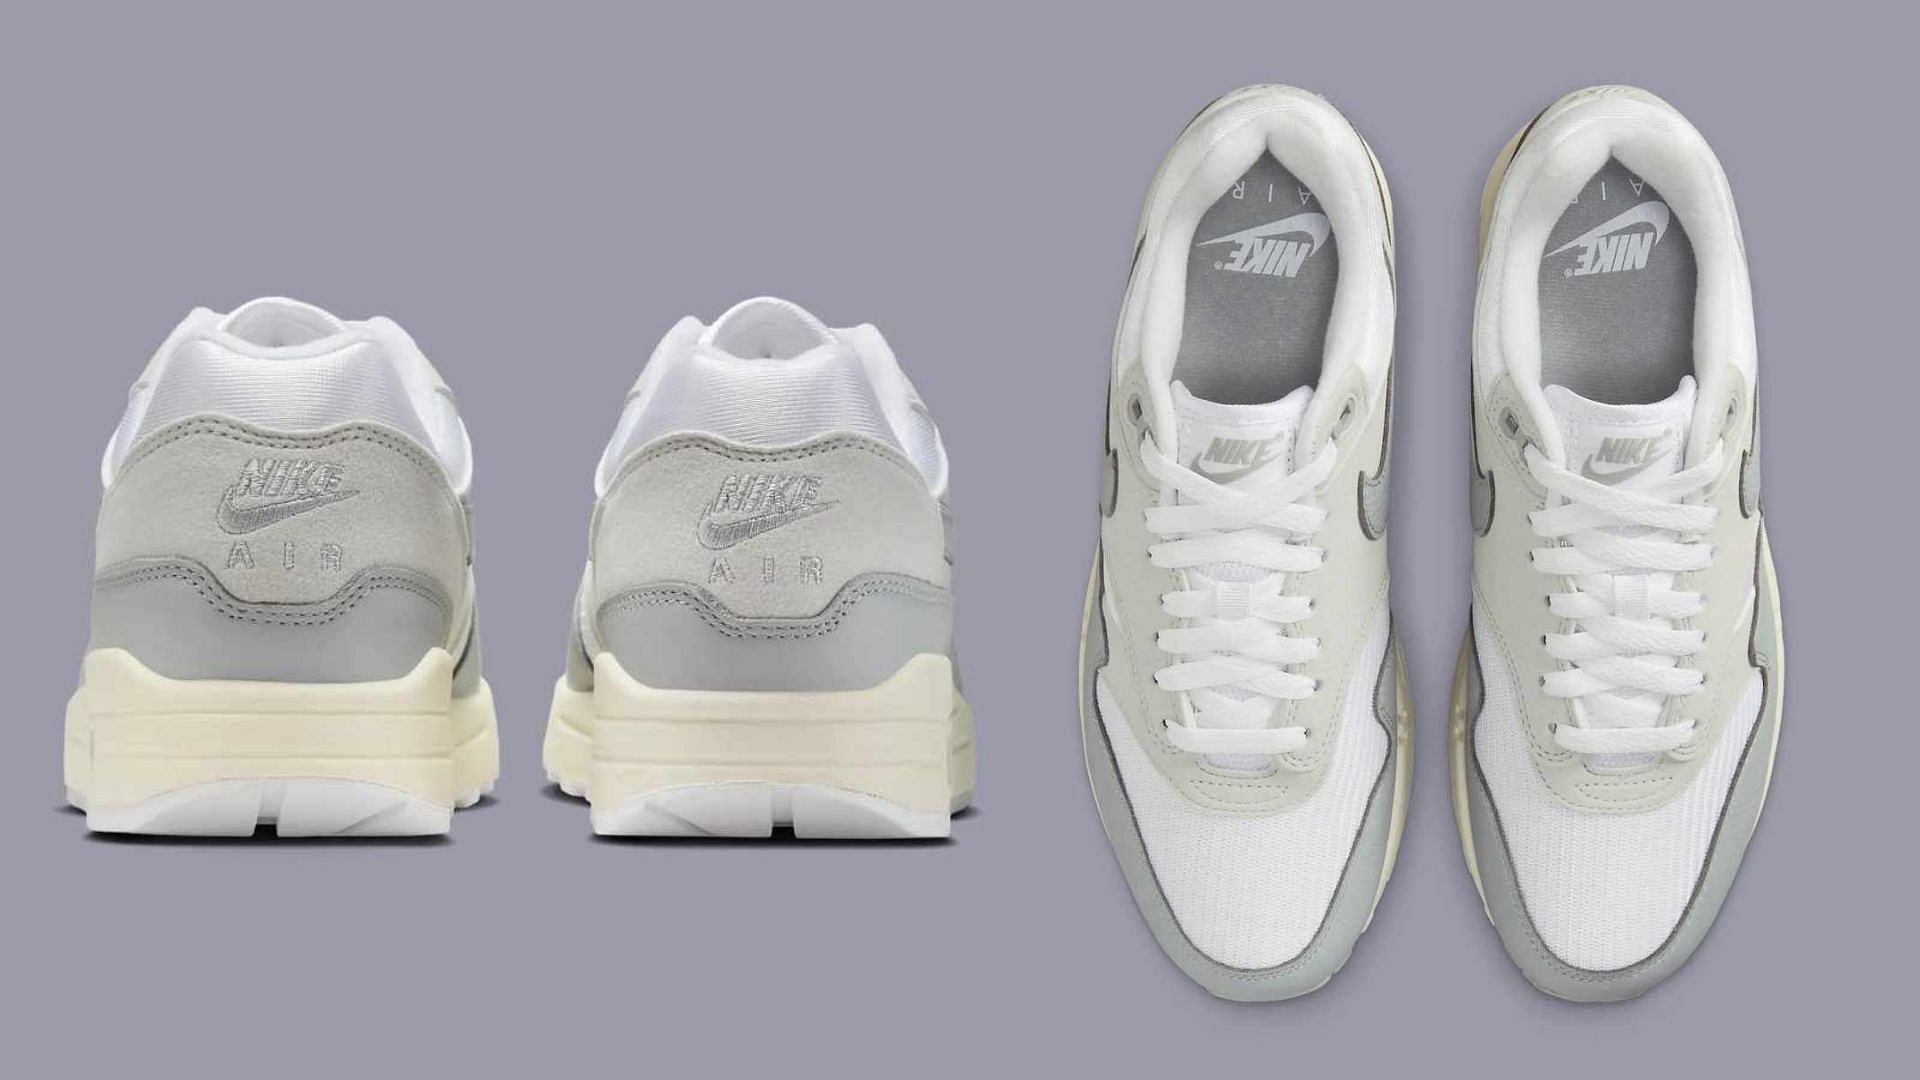 A closer look at the Nike Air Max 1 Pure Platinum shoes (Image via YouTube/@inboxtogo)